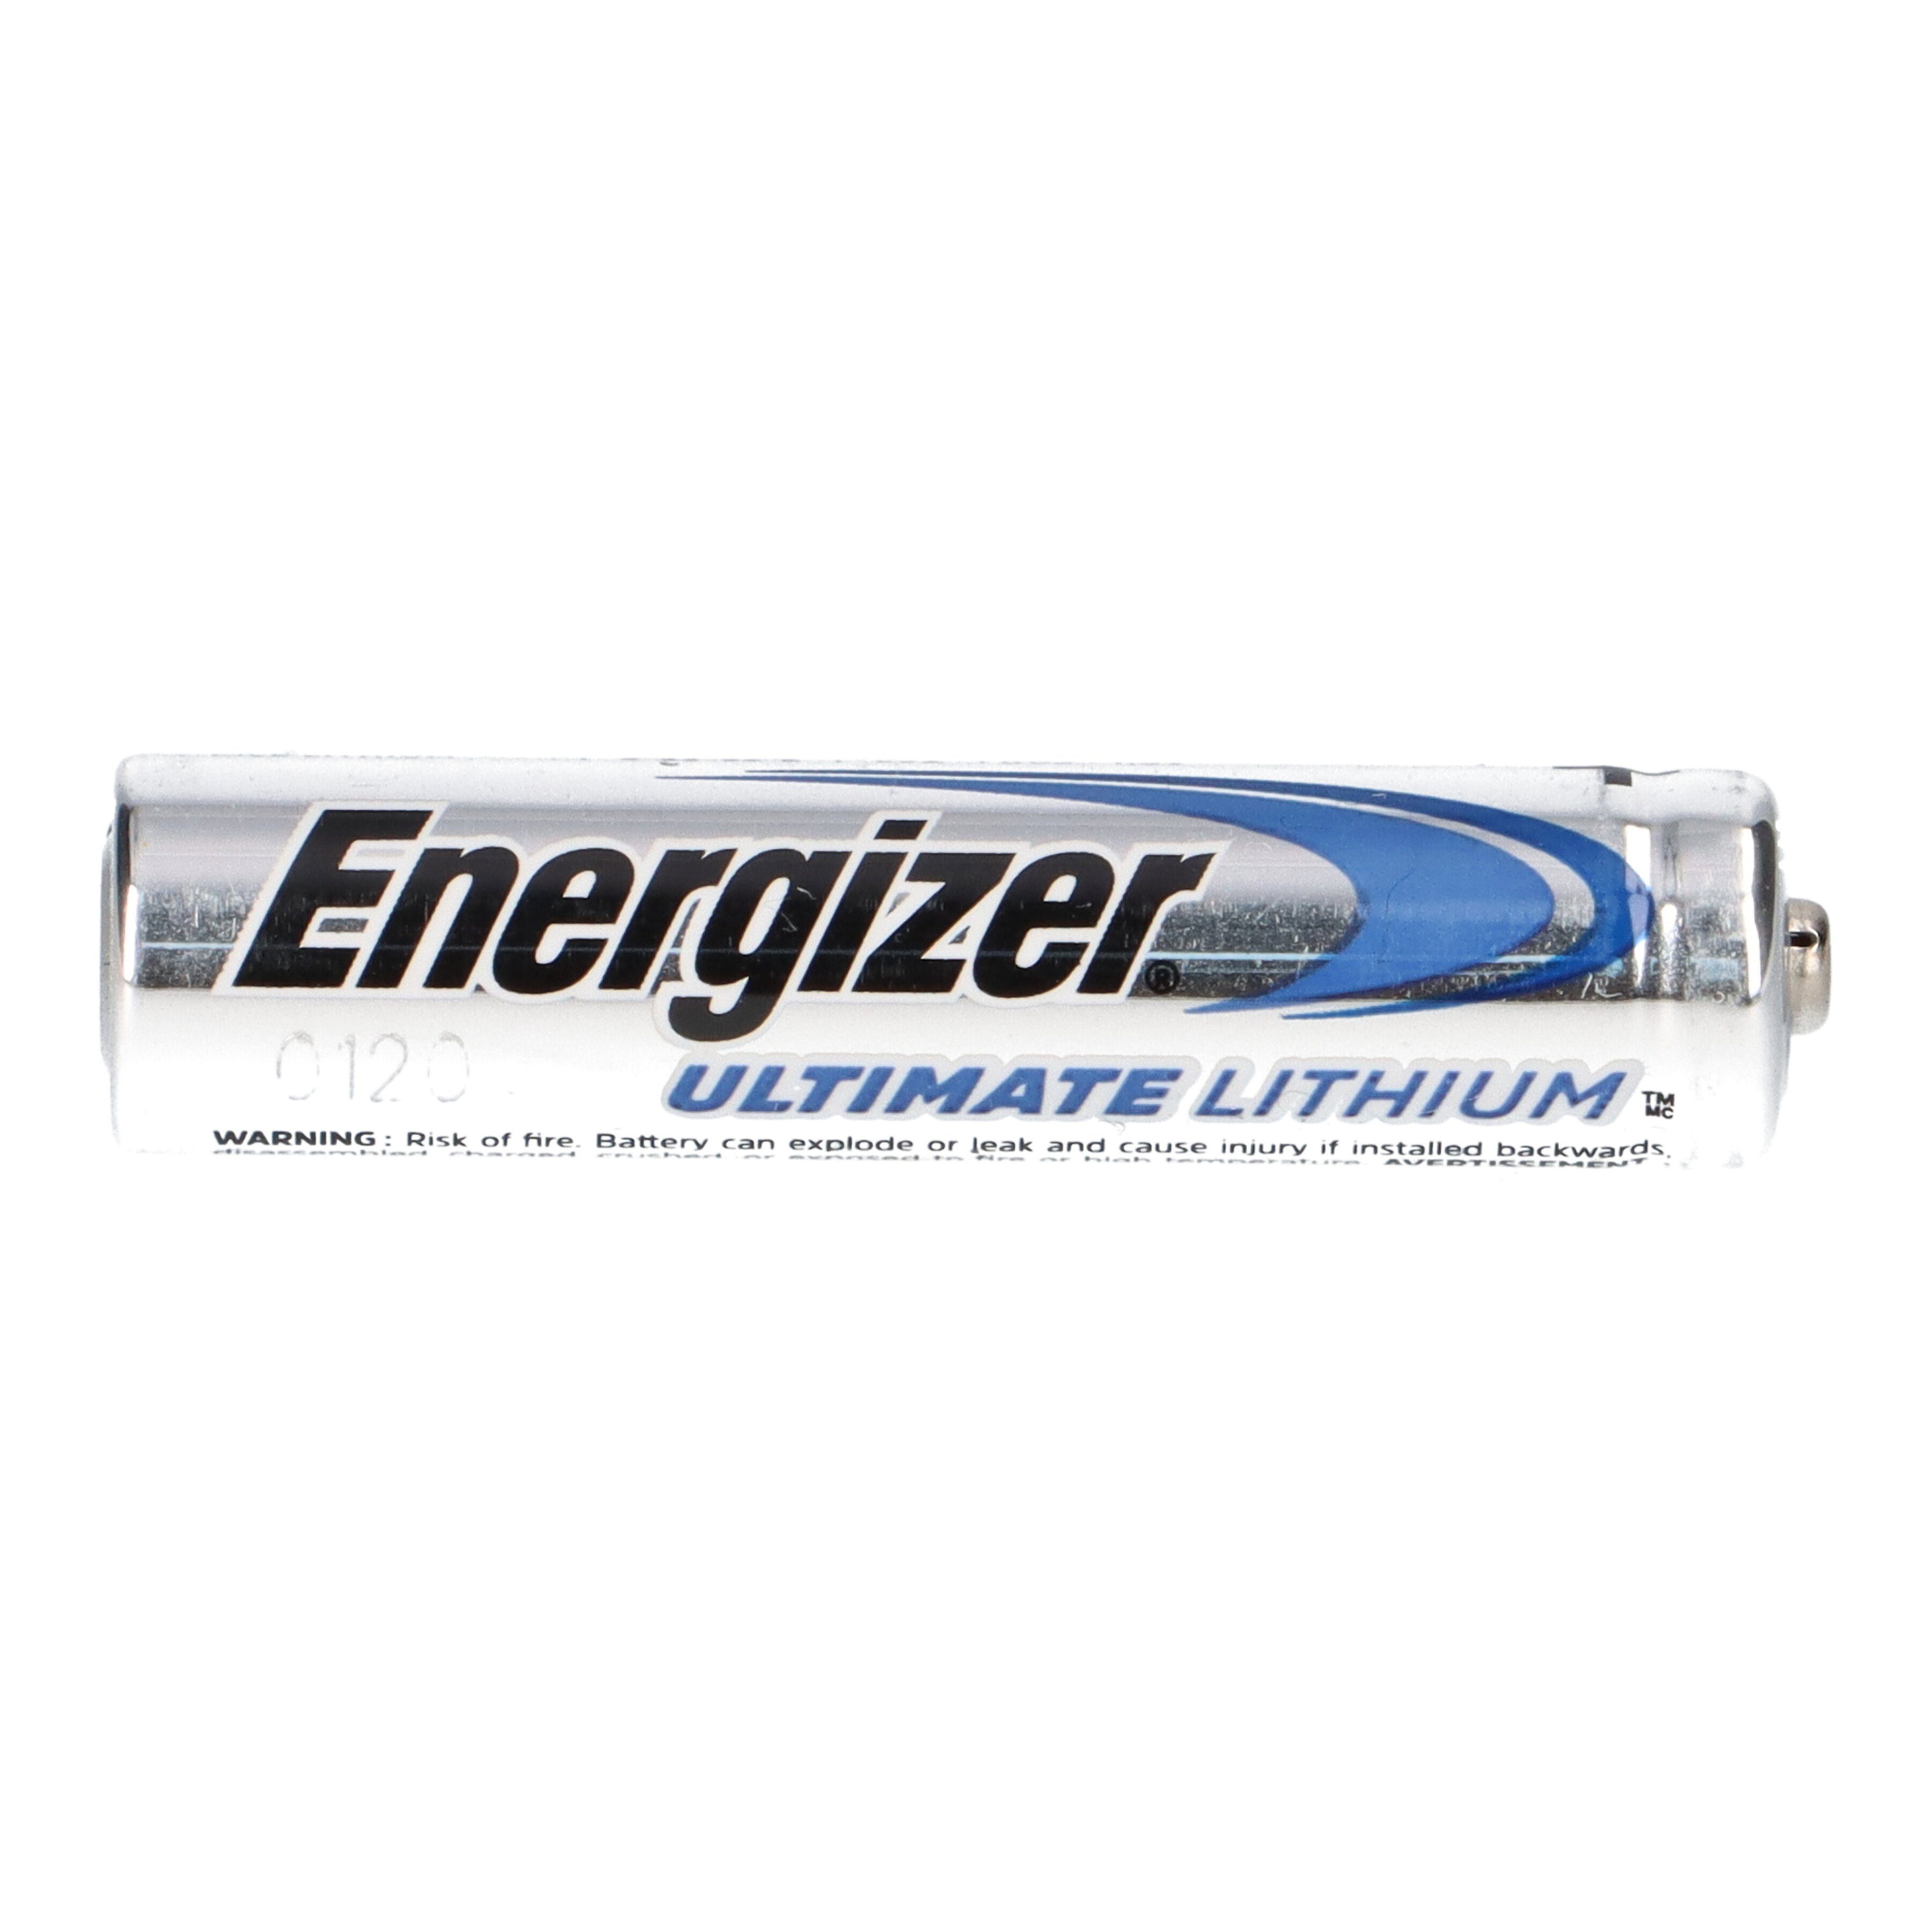 Ultimate AAA 120x Micro Batterie Energizer LR03 Batterie Lithium 1.5V Energizer L92